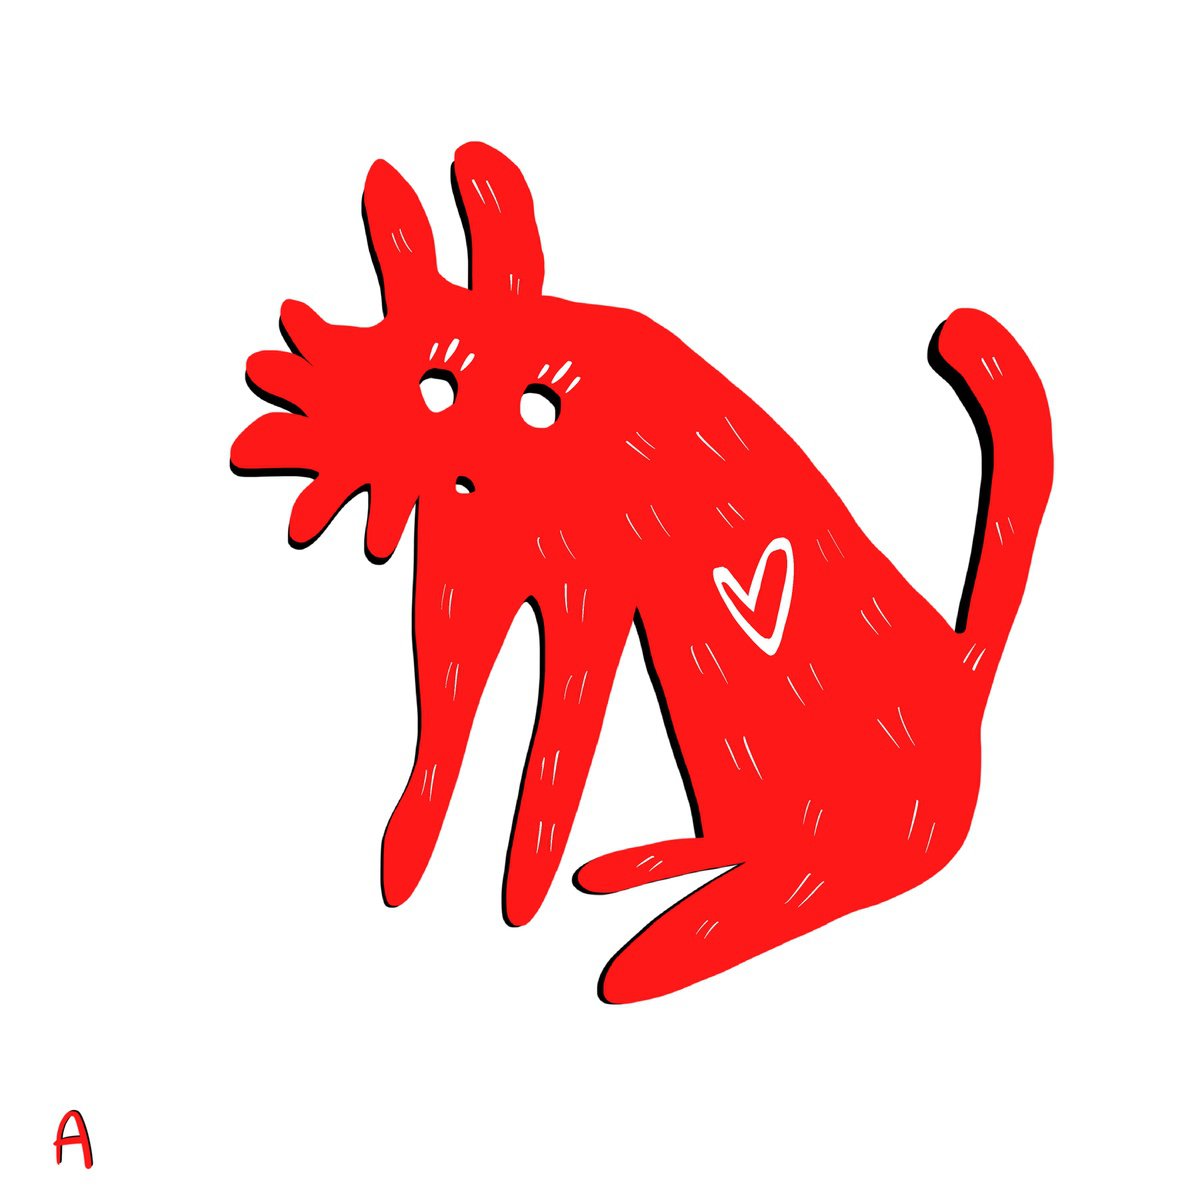 CAT (red heart collection) by ngel Rivas